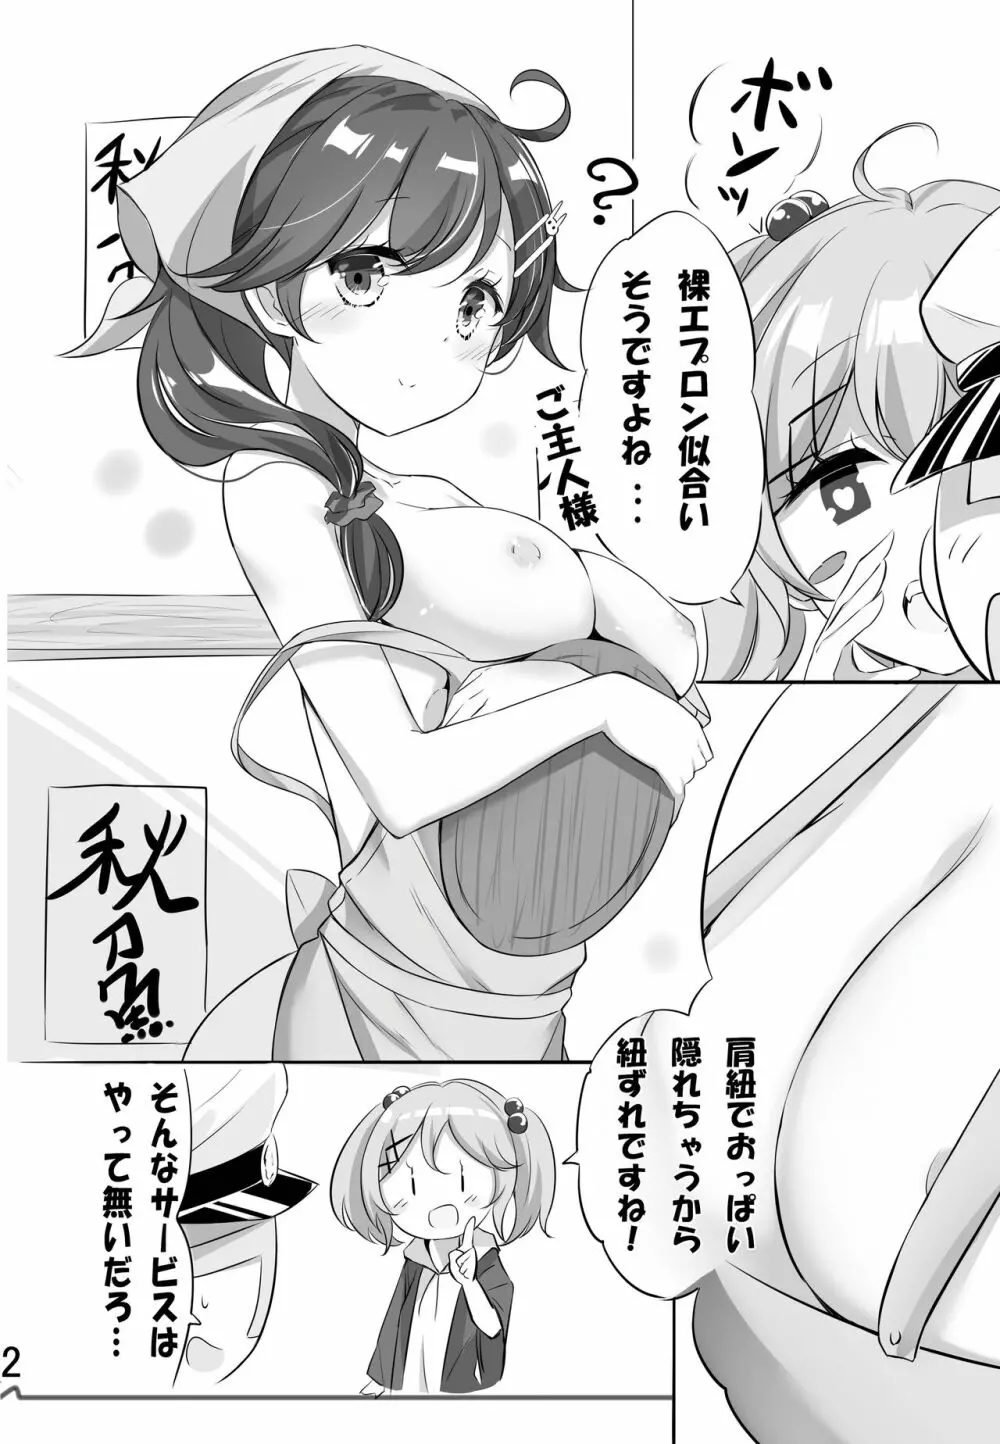 hamaken collection 総集編vol 9～12 プラス 七駆の乳くらべ Page.69